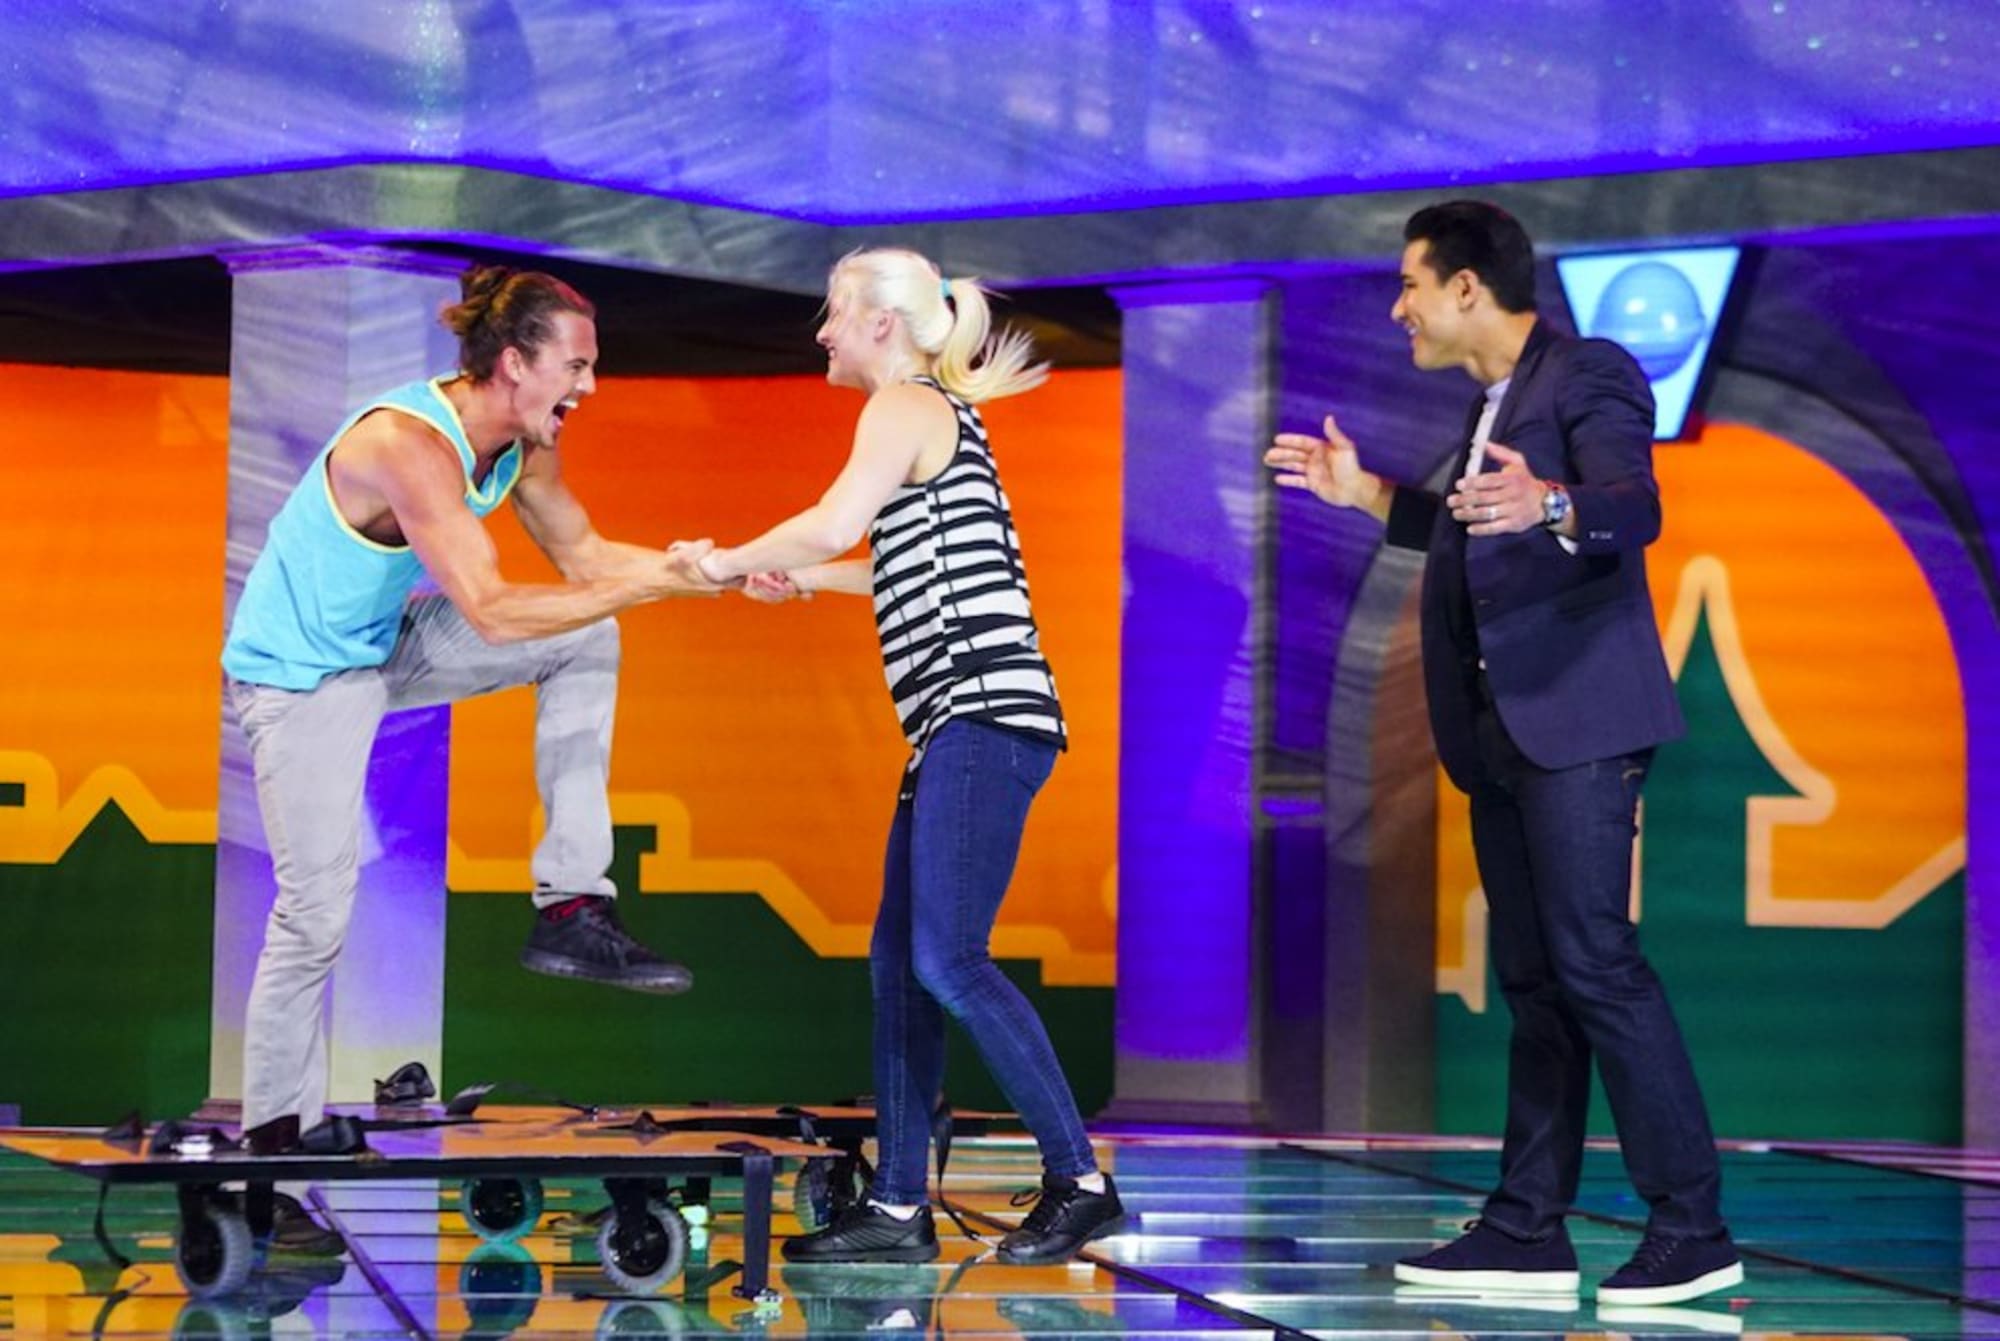 CBS is turning “Candy Crush” into a game show